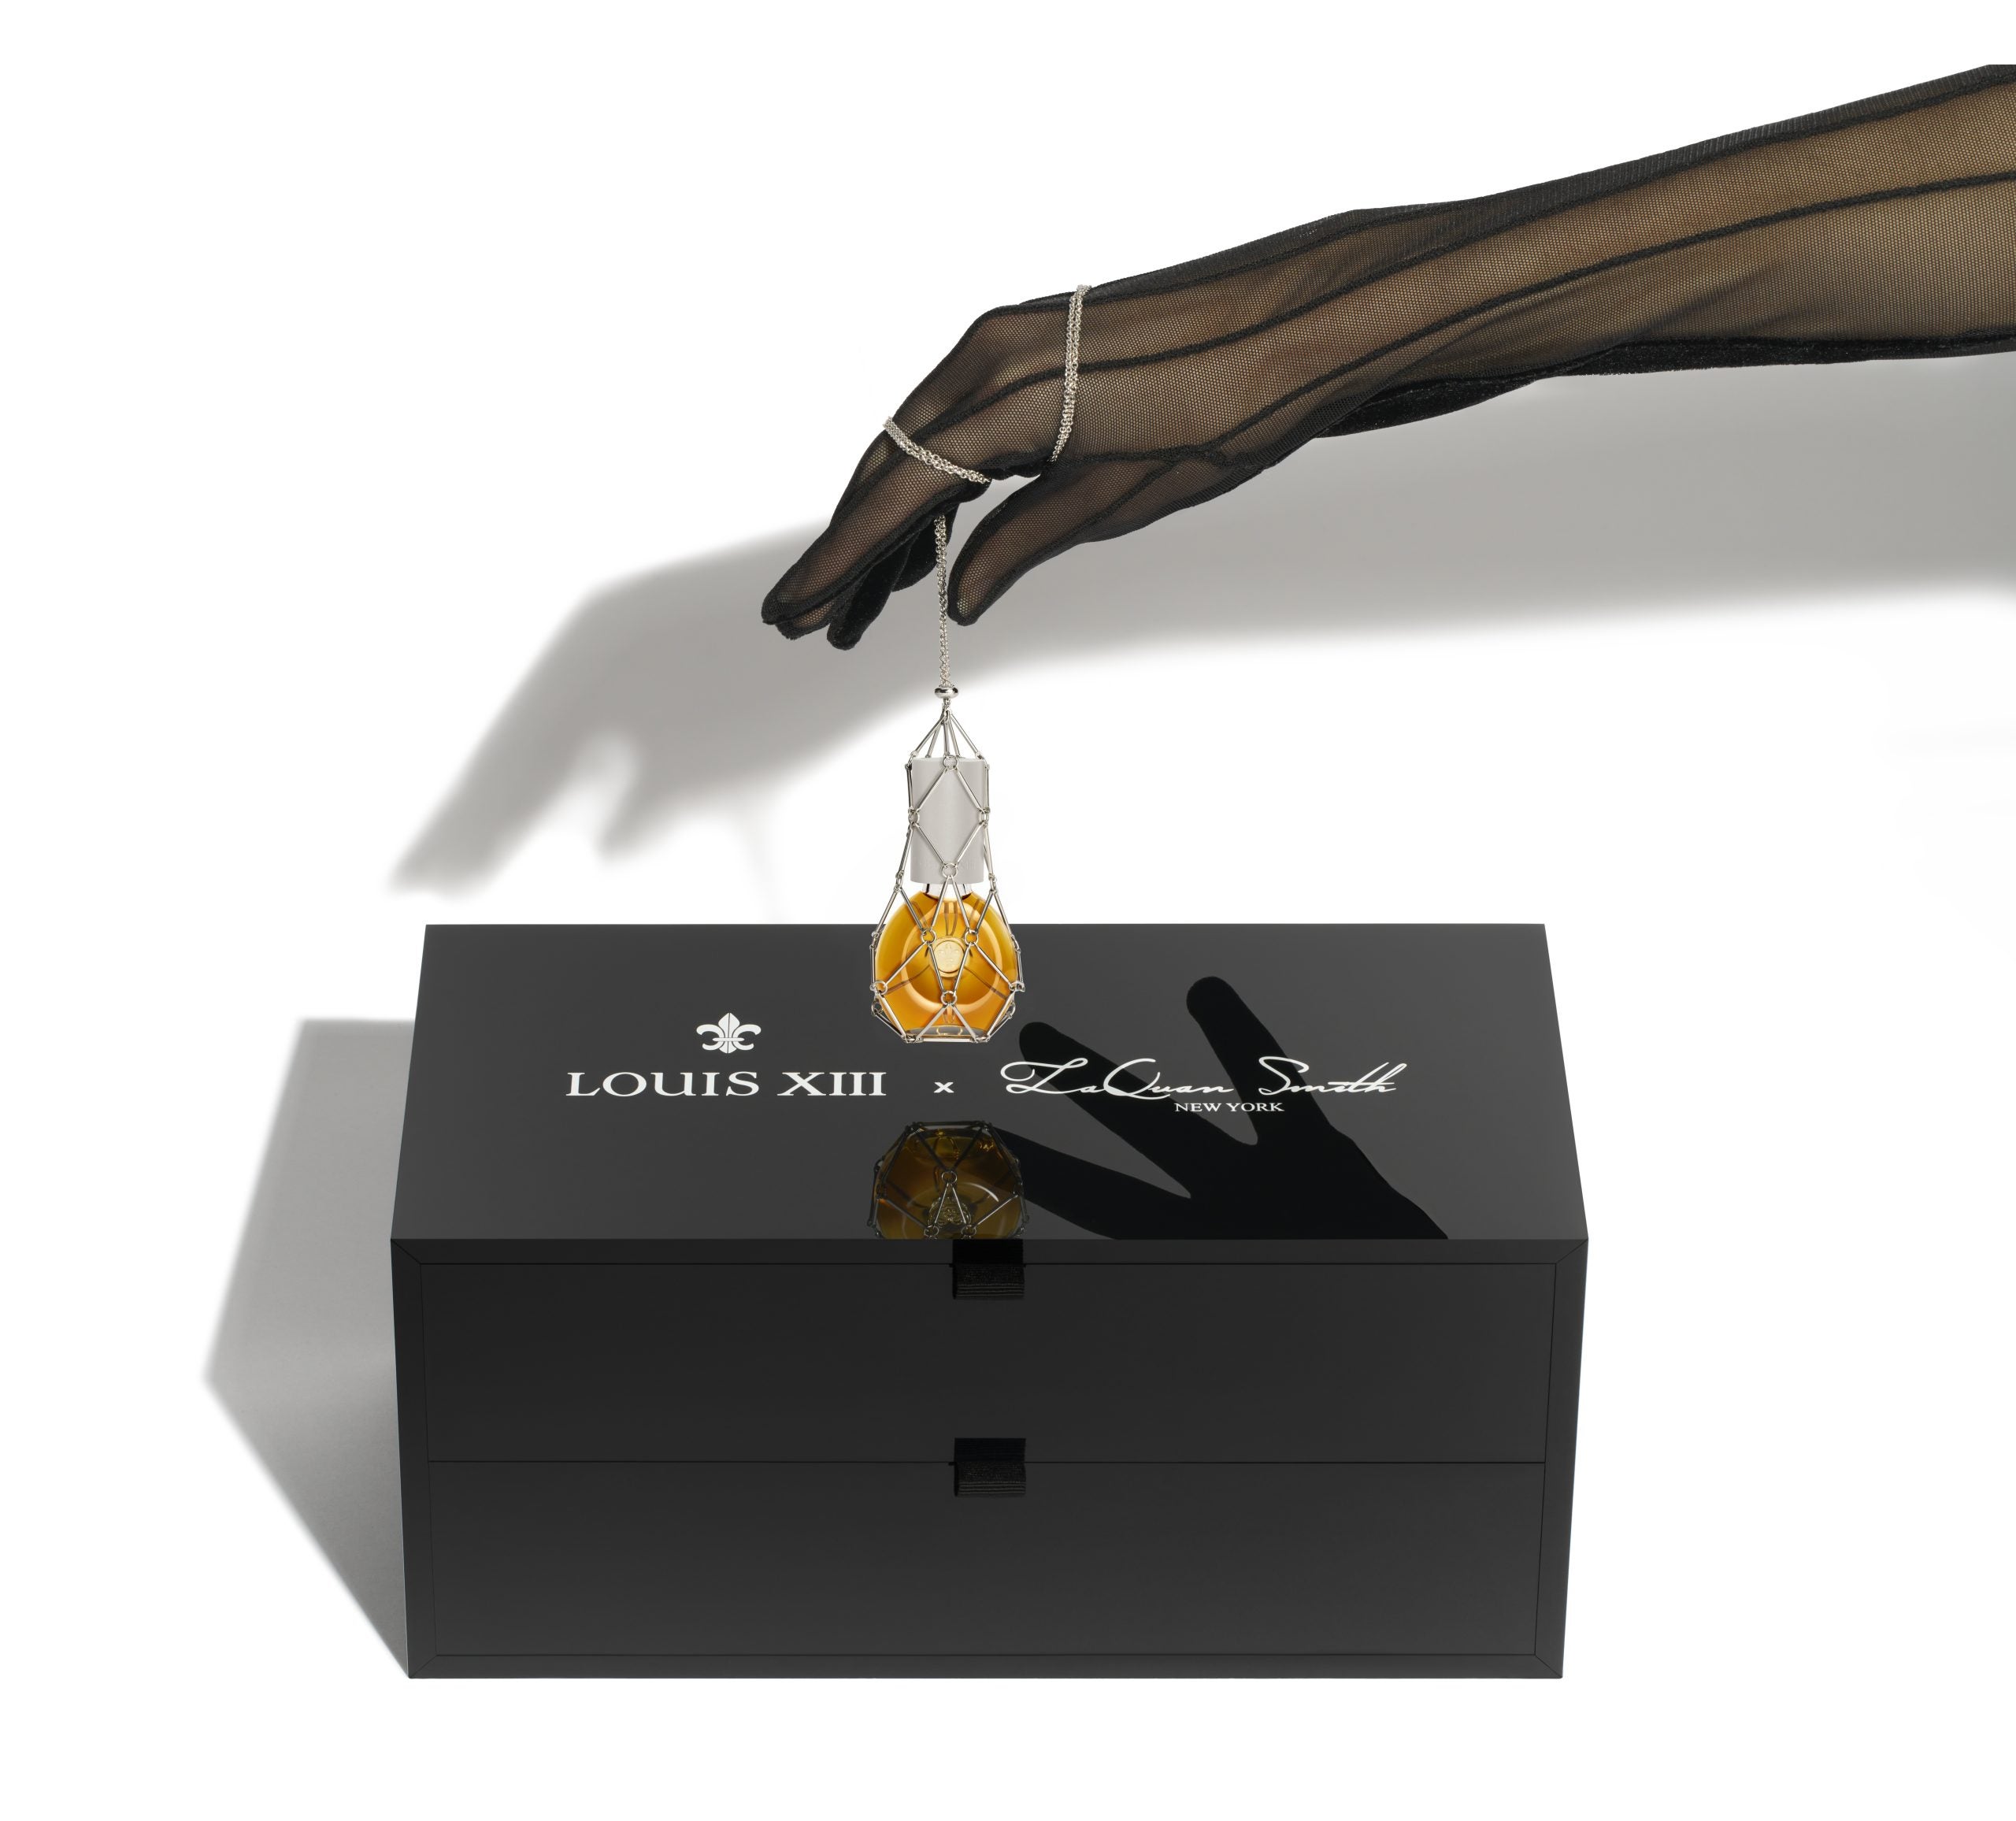 Let's Toast: You Will Never Drink Cognac The Same After This LaQuan Smith x Louis XIII Collab